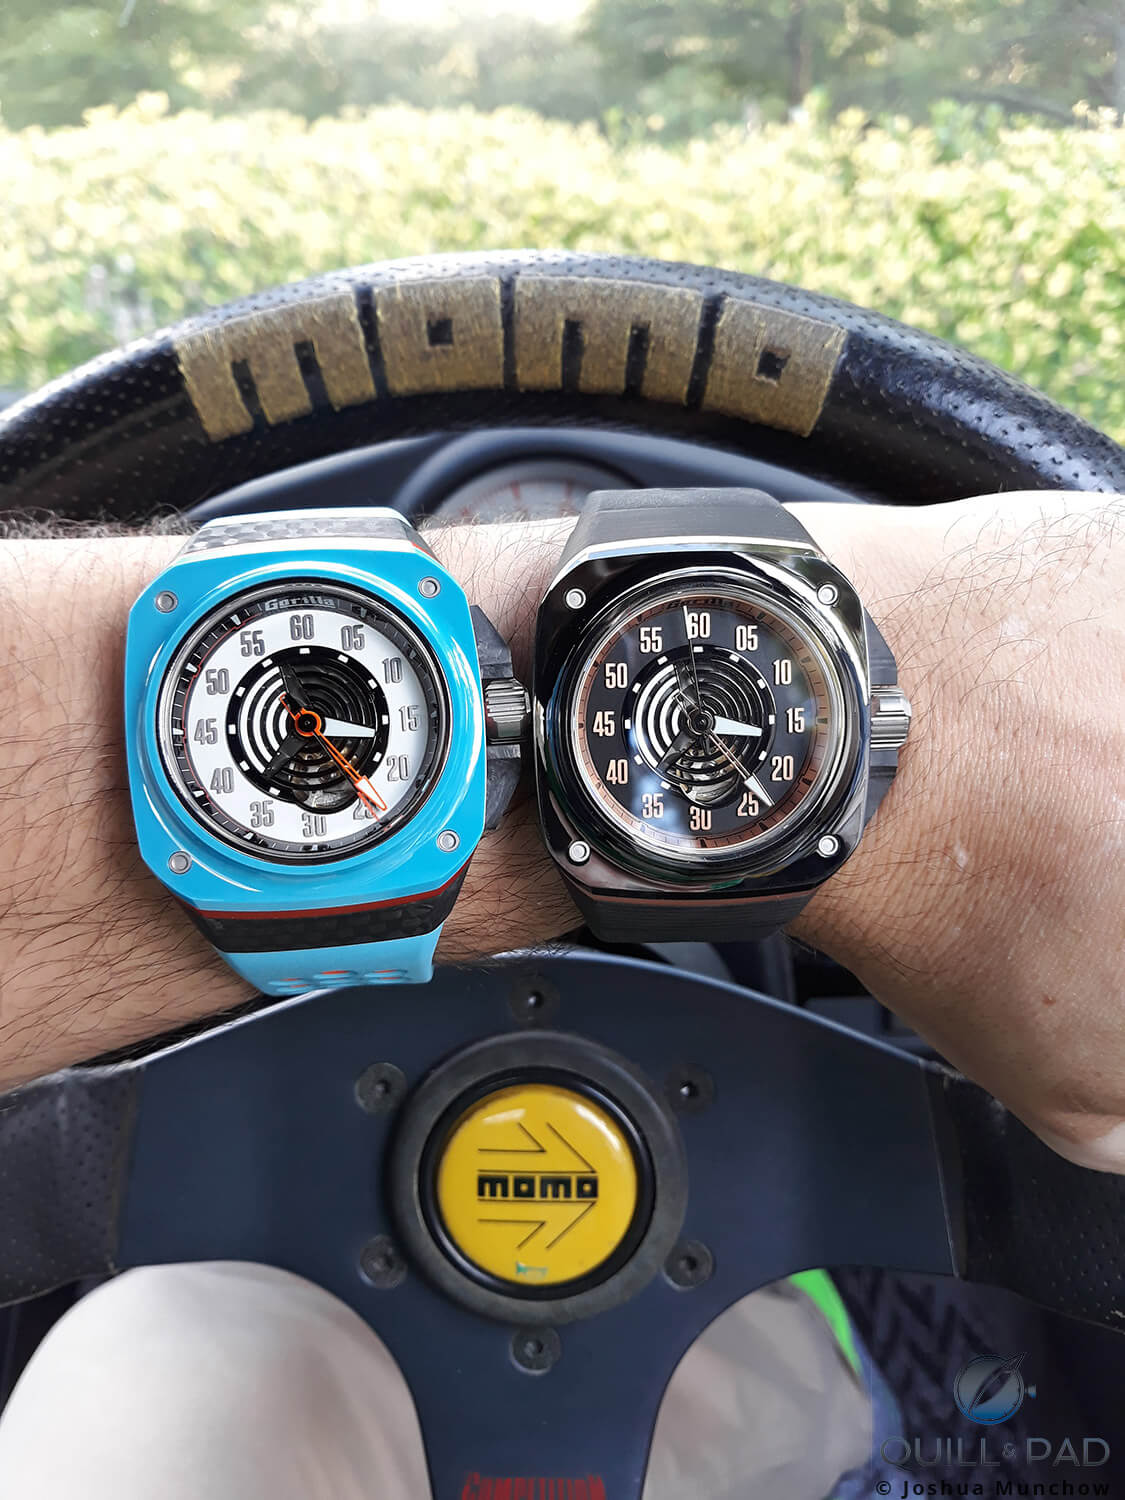 Gorilla Fastback GT Mirage and Bandit on the wrist